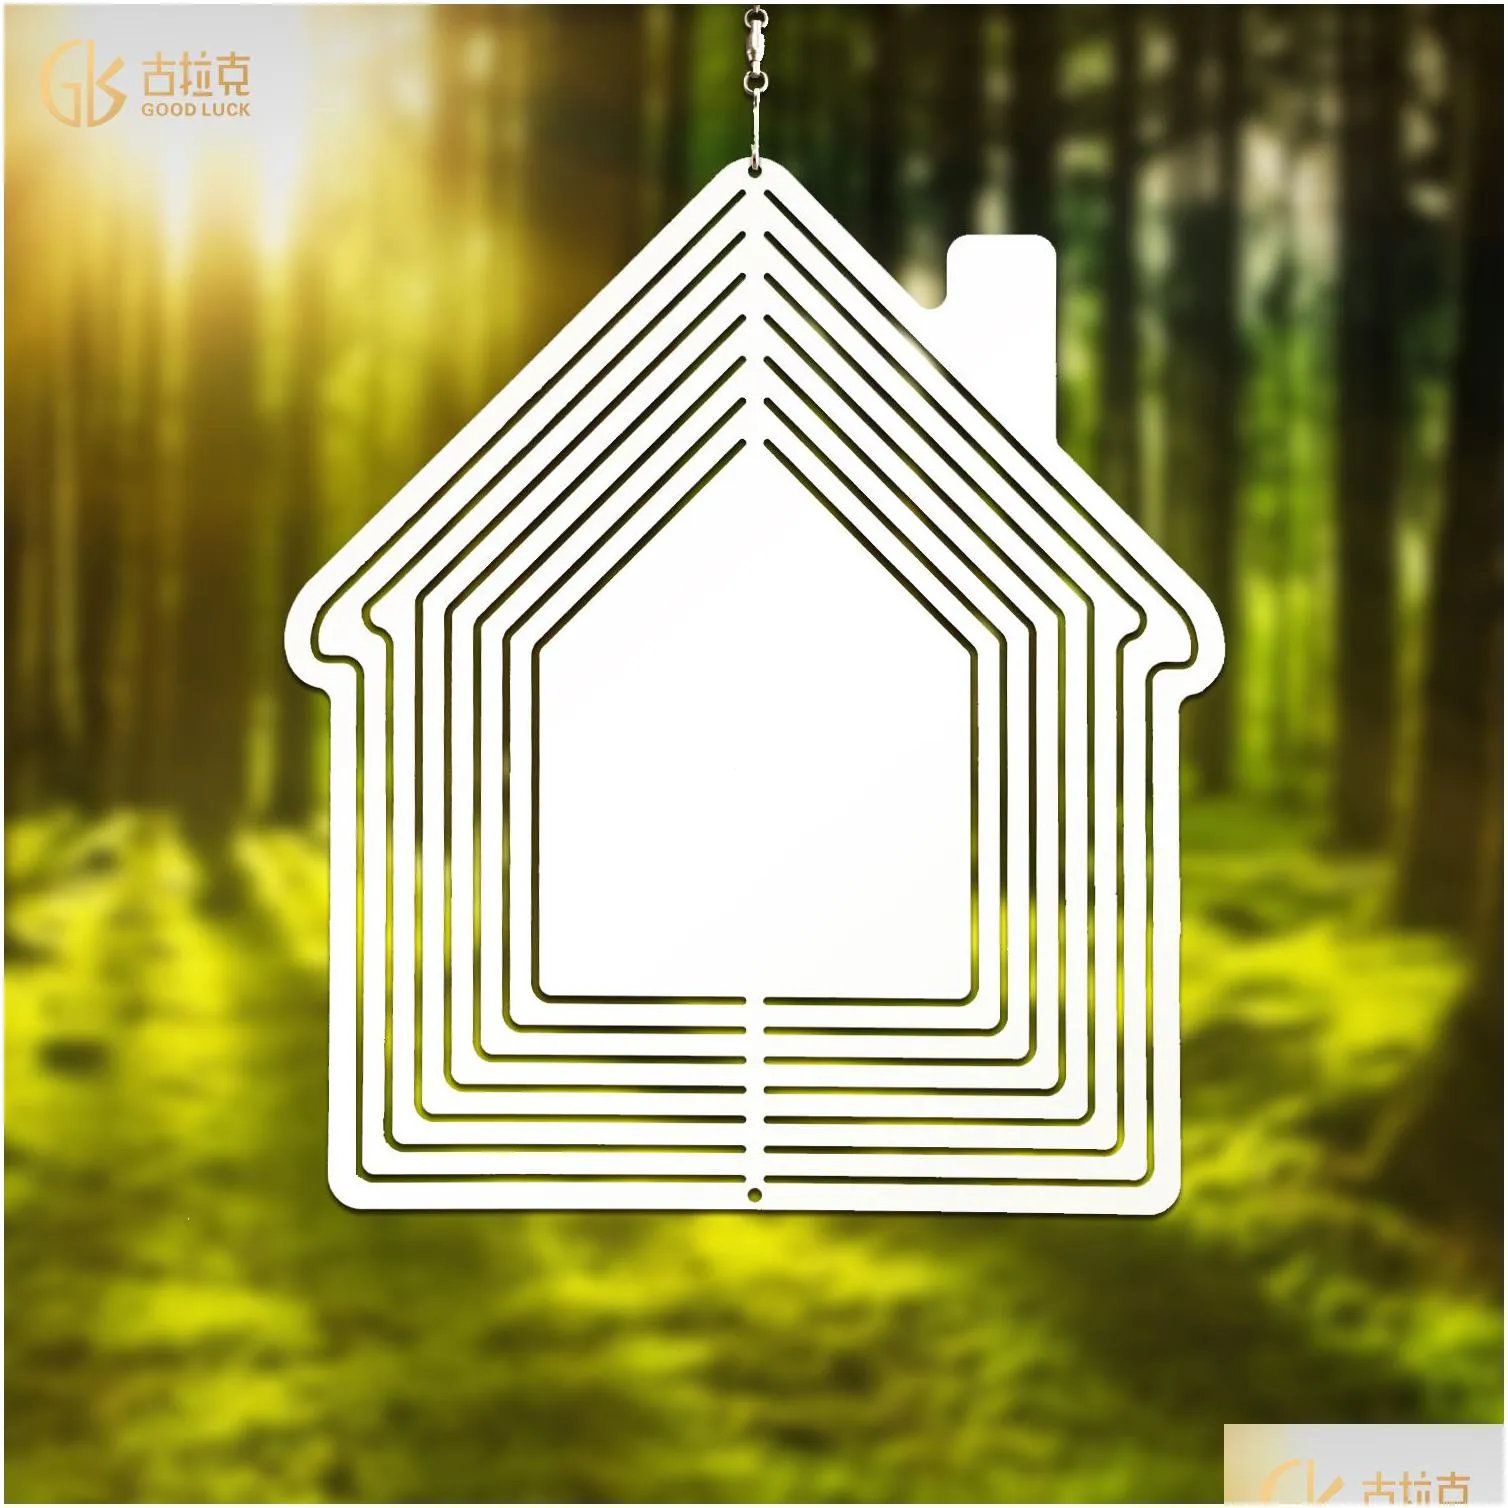 Wholesale 10 Inch Double Sided Printed Aluminum 3D Wind Spinner For Yard  And Garden Decor Aluminum Sublimation Ornaments With Metal Hanging Decors  Drop Delivery DH415 From Bdesybag, $4.44